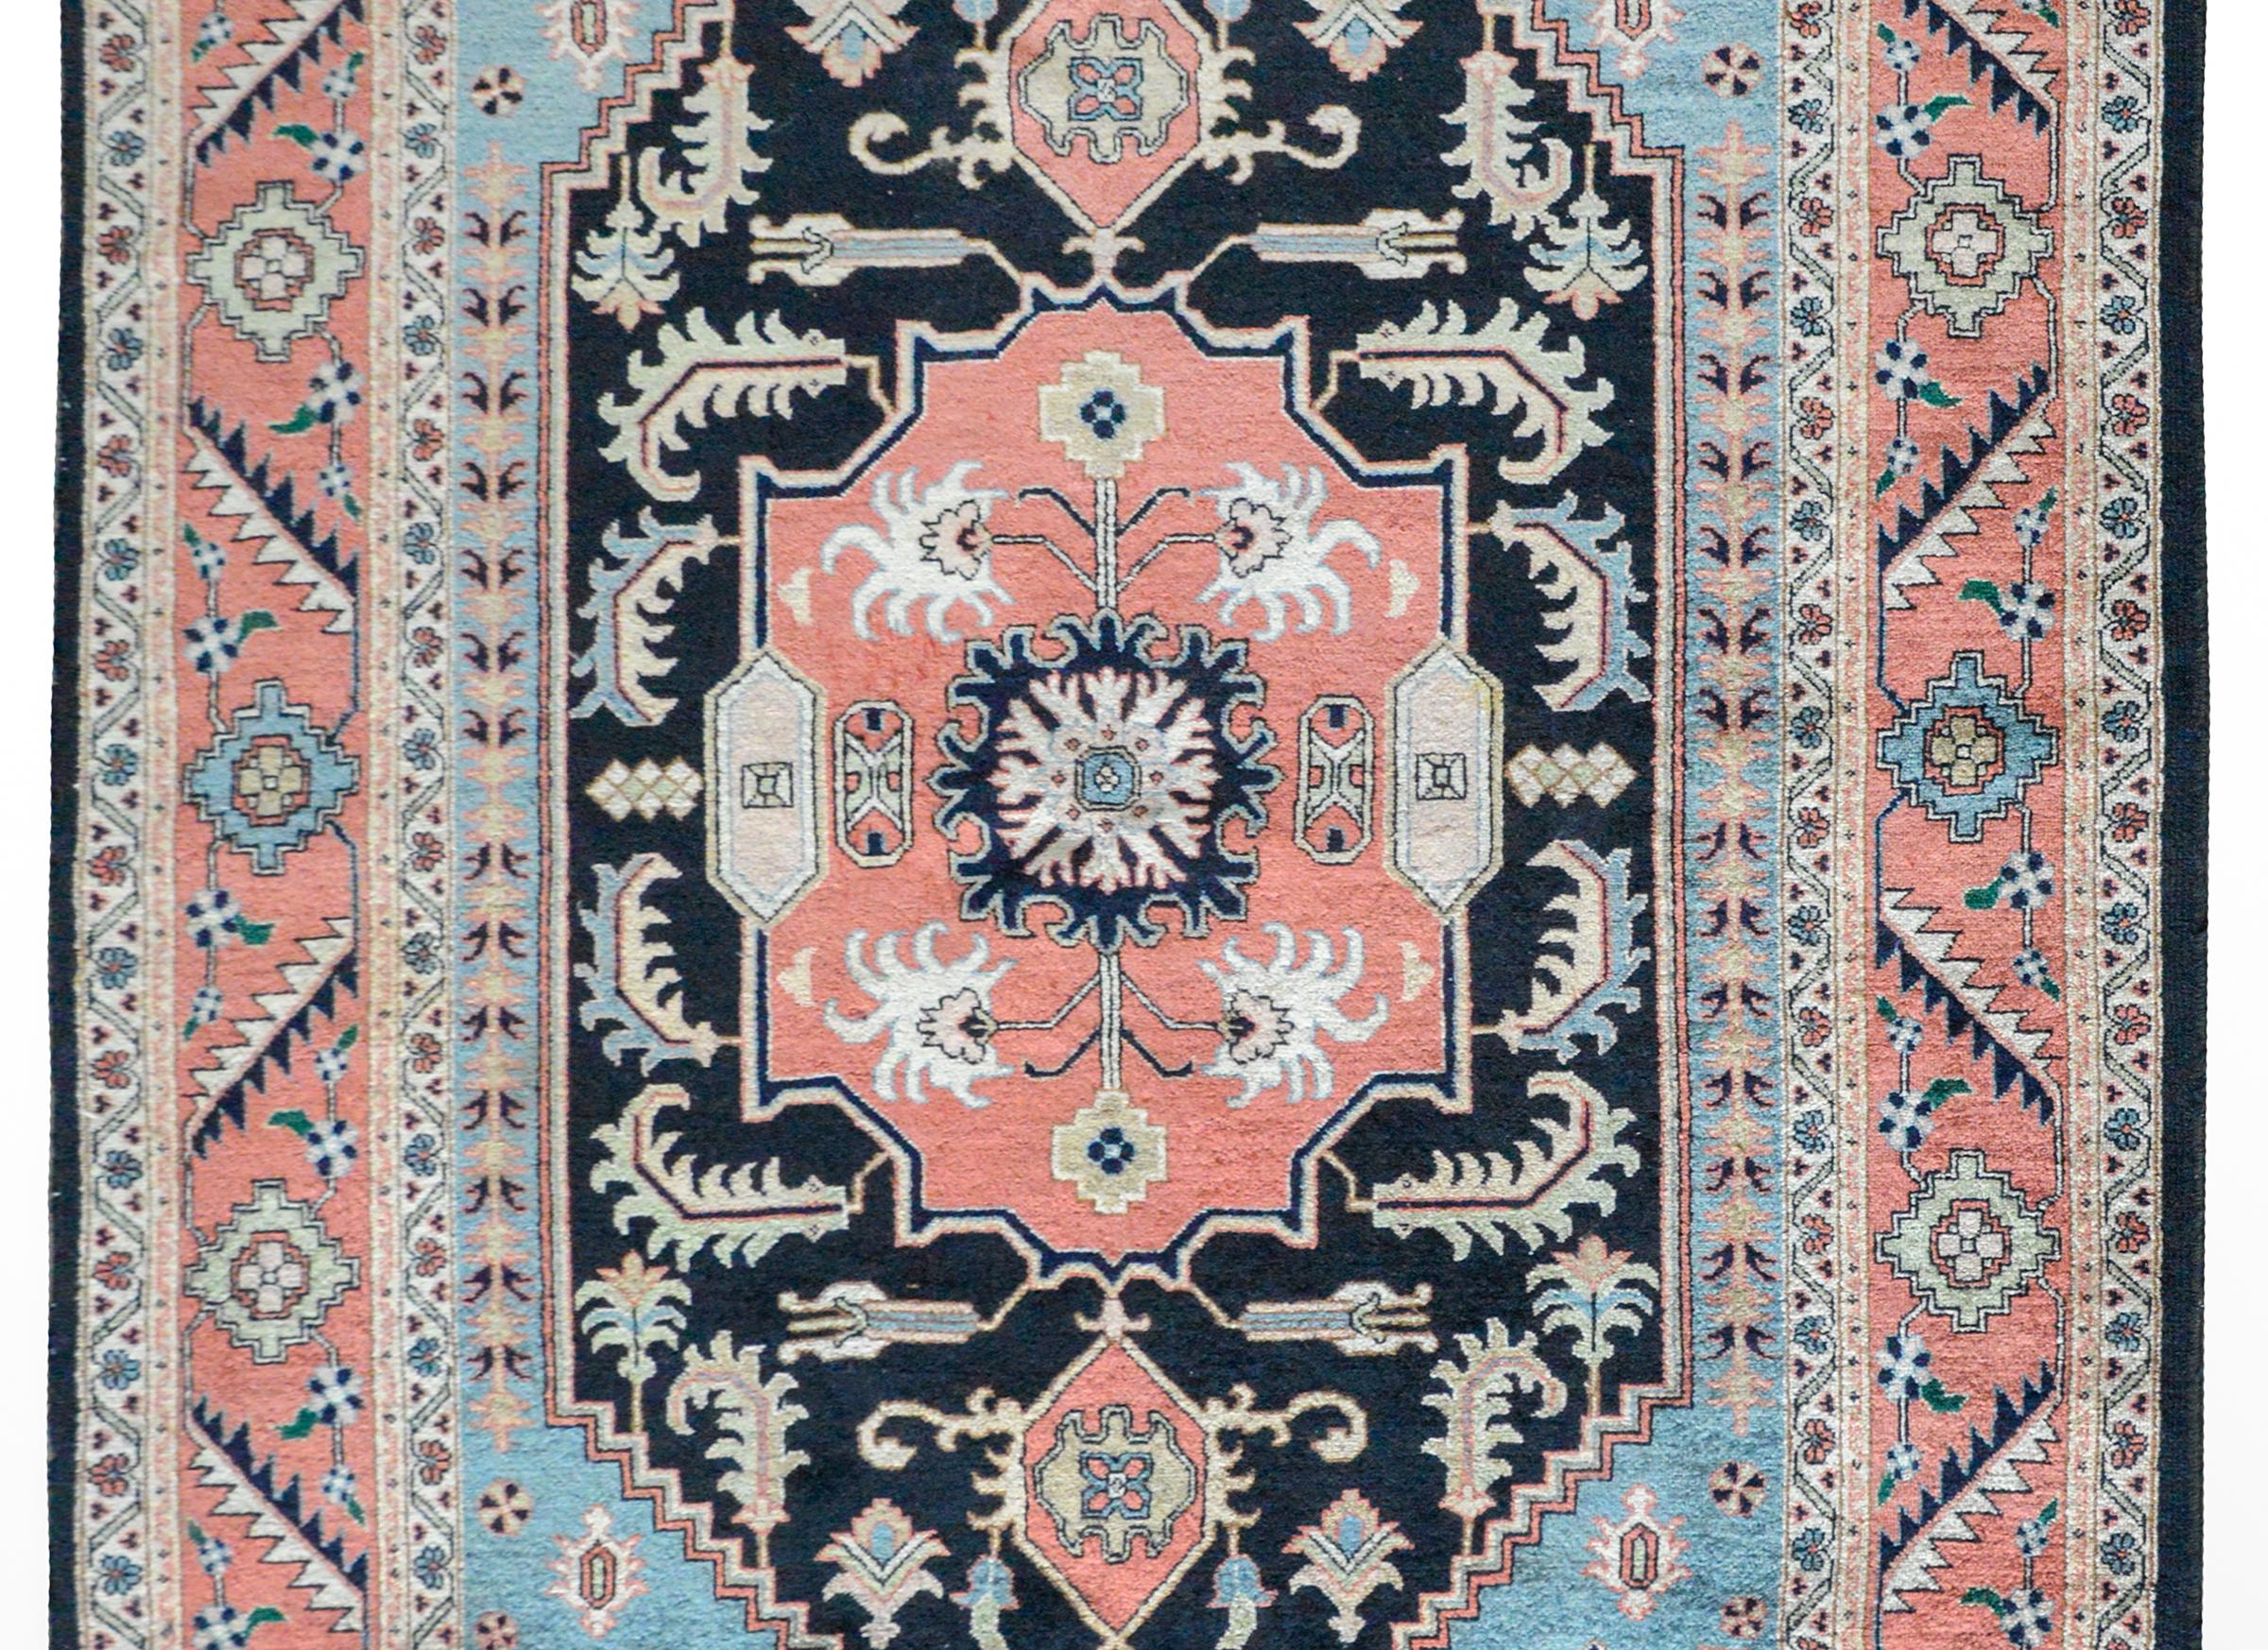 A beautiful vintage Persian Heriz rug woven with a central floral medallion amidst a field of more bold stylized flowers, and surrounded by a wide floral and leaf pattered border, all woven in muted reds, blues, and yellows.